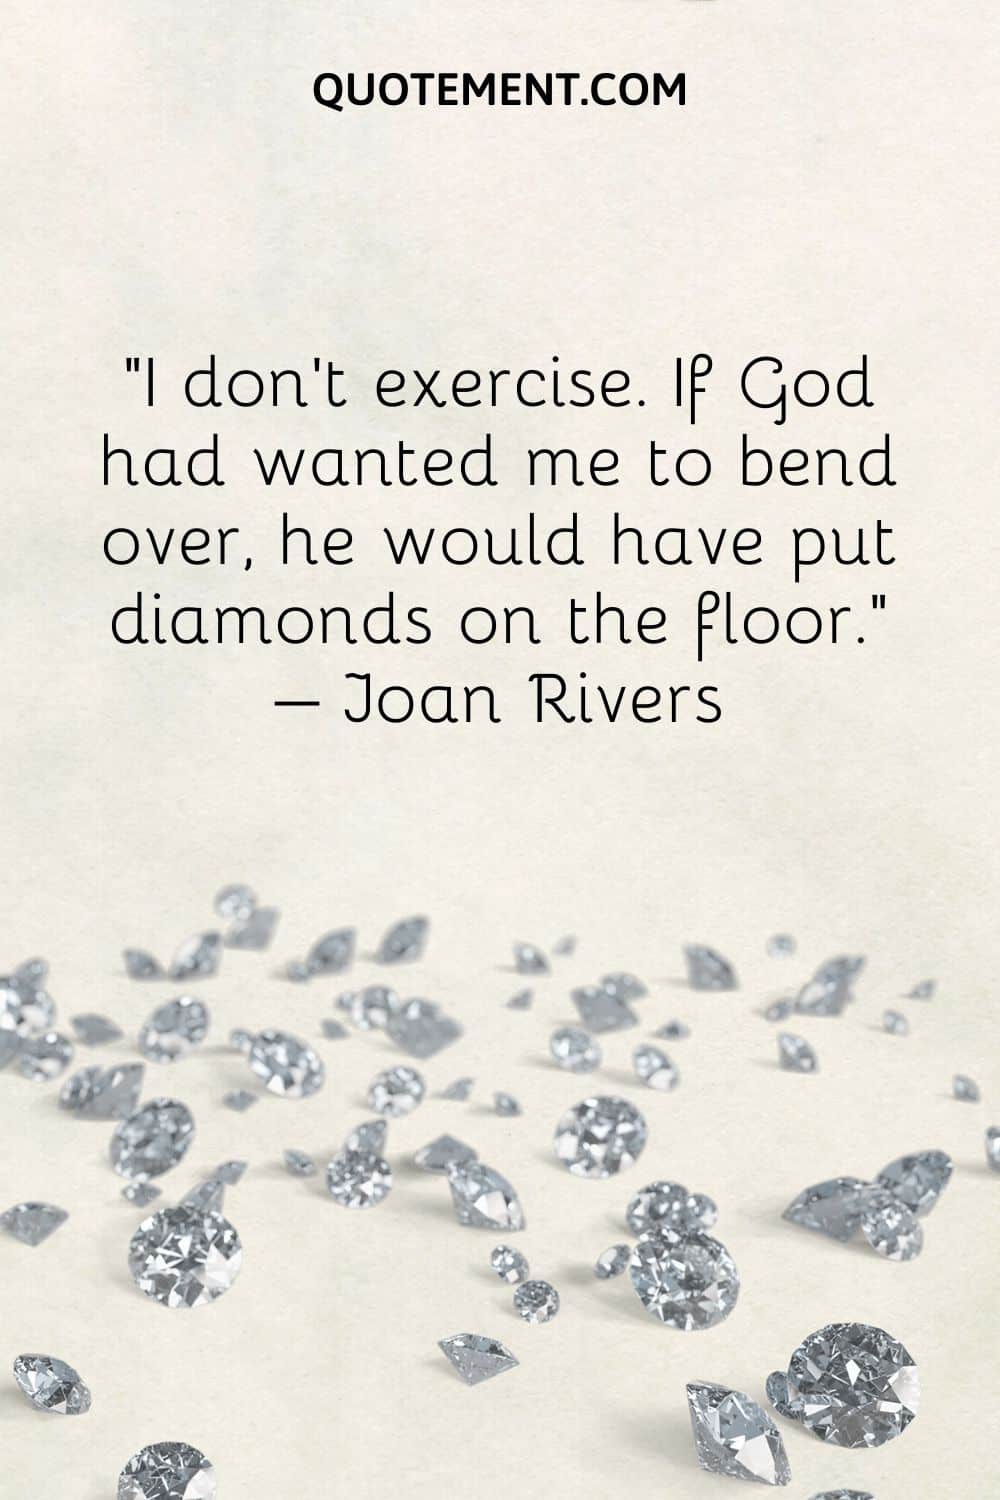 I don’t exercise. If God had wanted me to bend over, he would have put diamonds on the floor